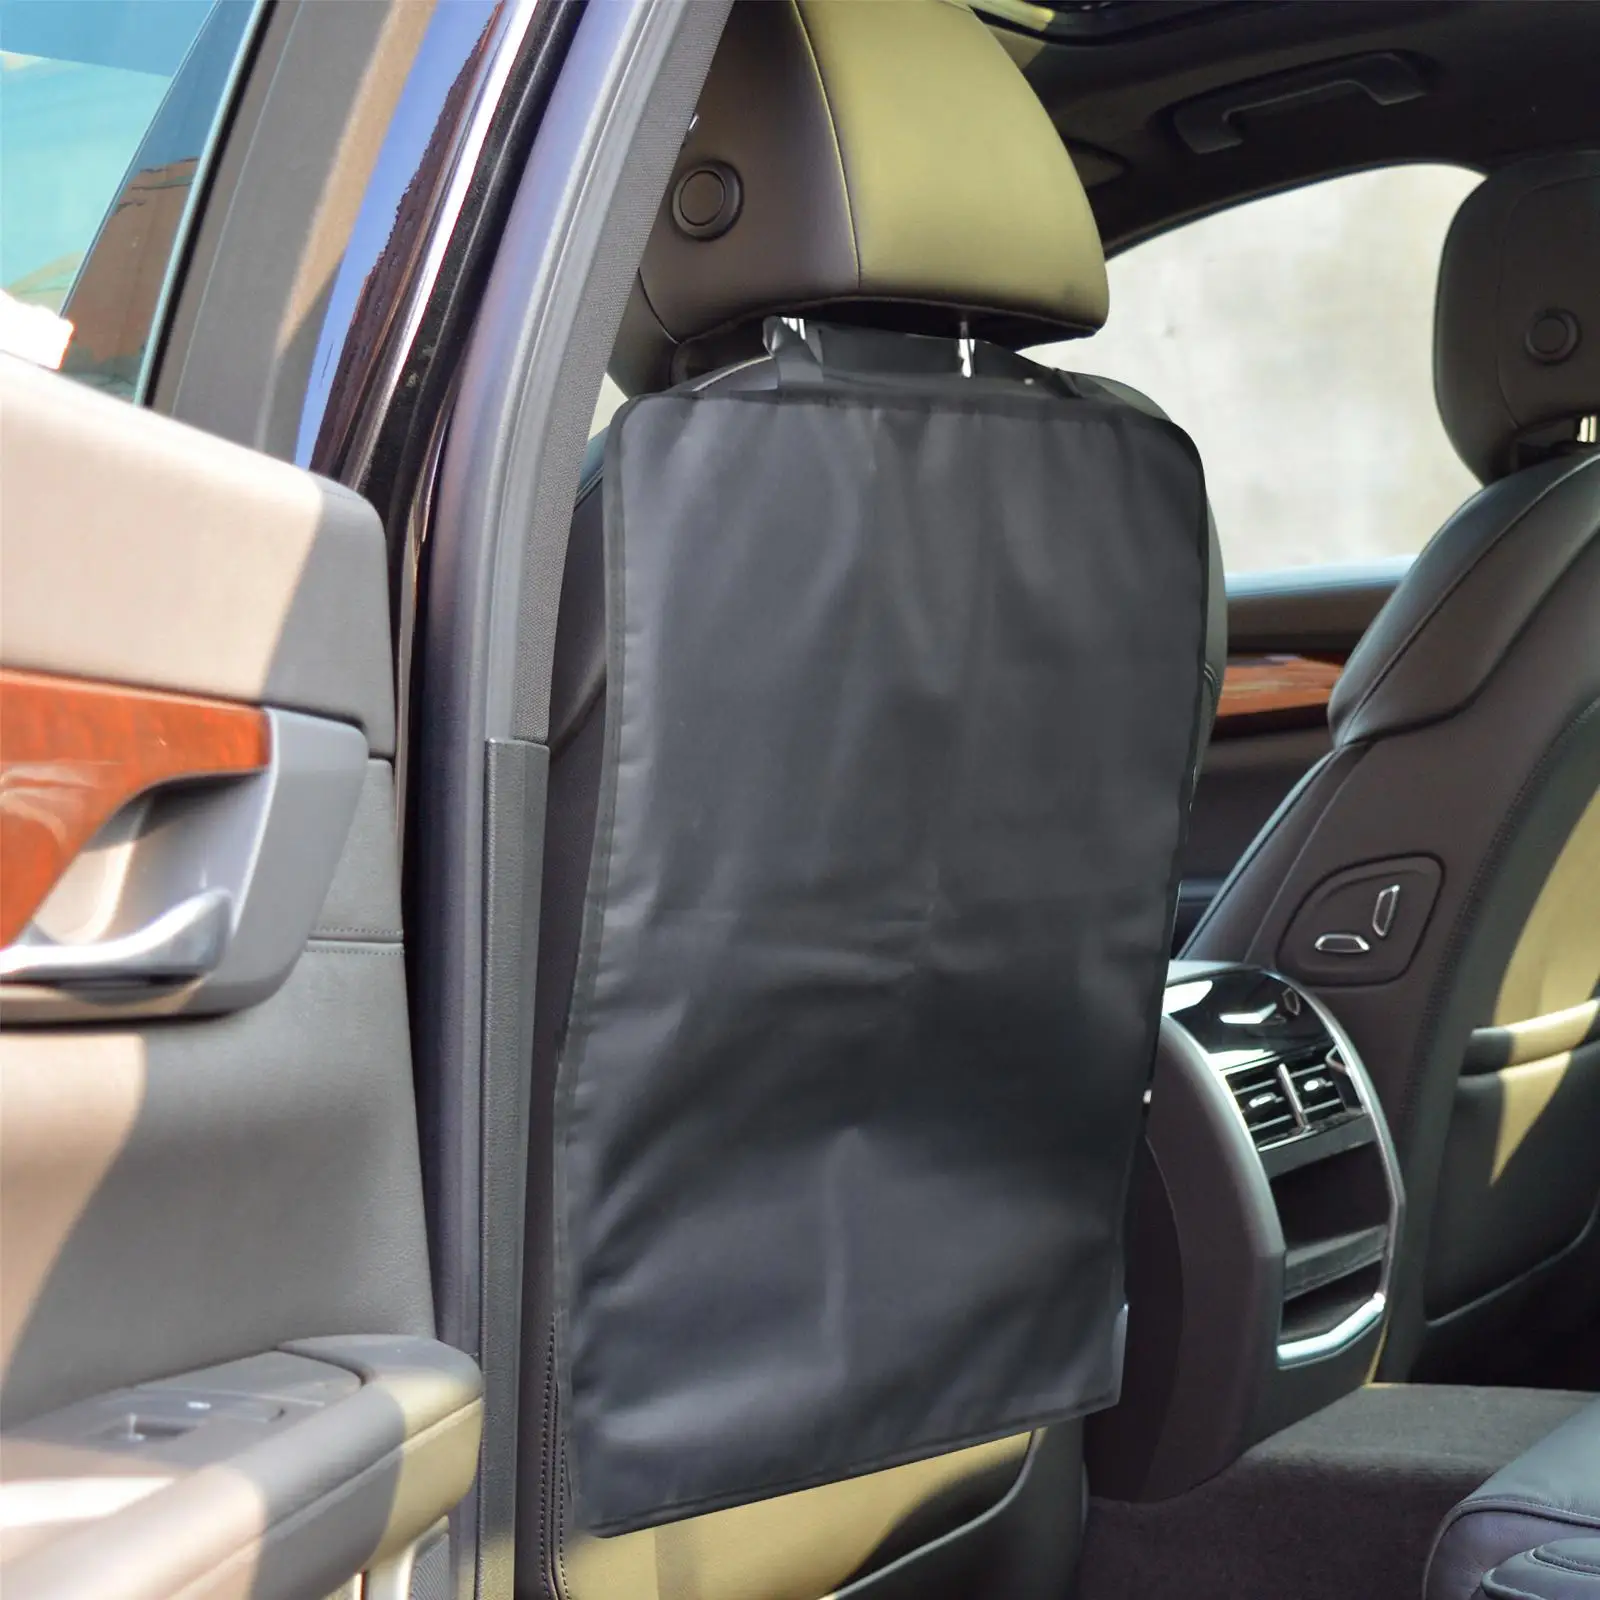 Auto Kick Mats Universal Multifunctional Interior Accessories Car Seat Back Protectors for Most Suvs and Vans Vehicles